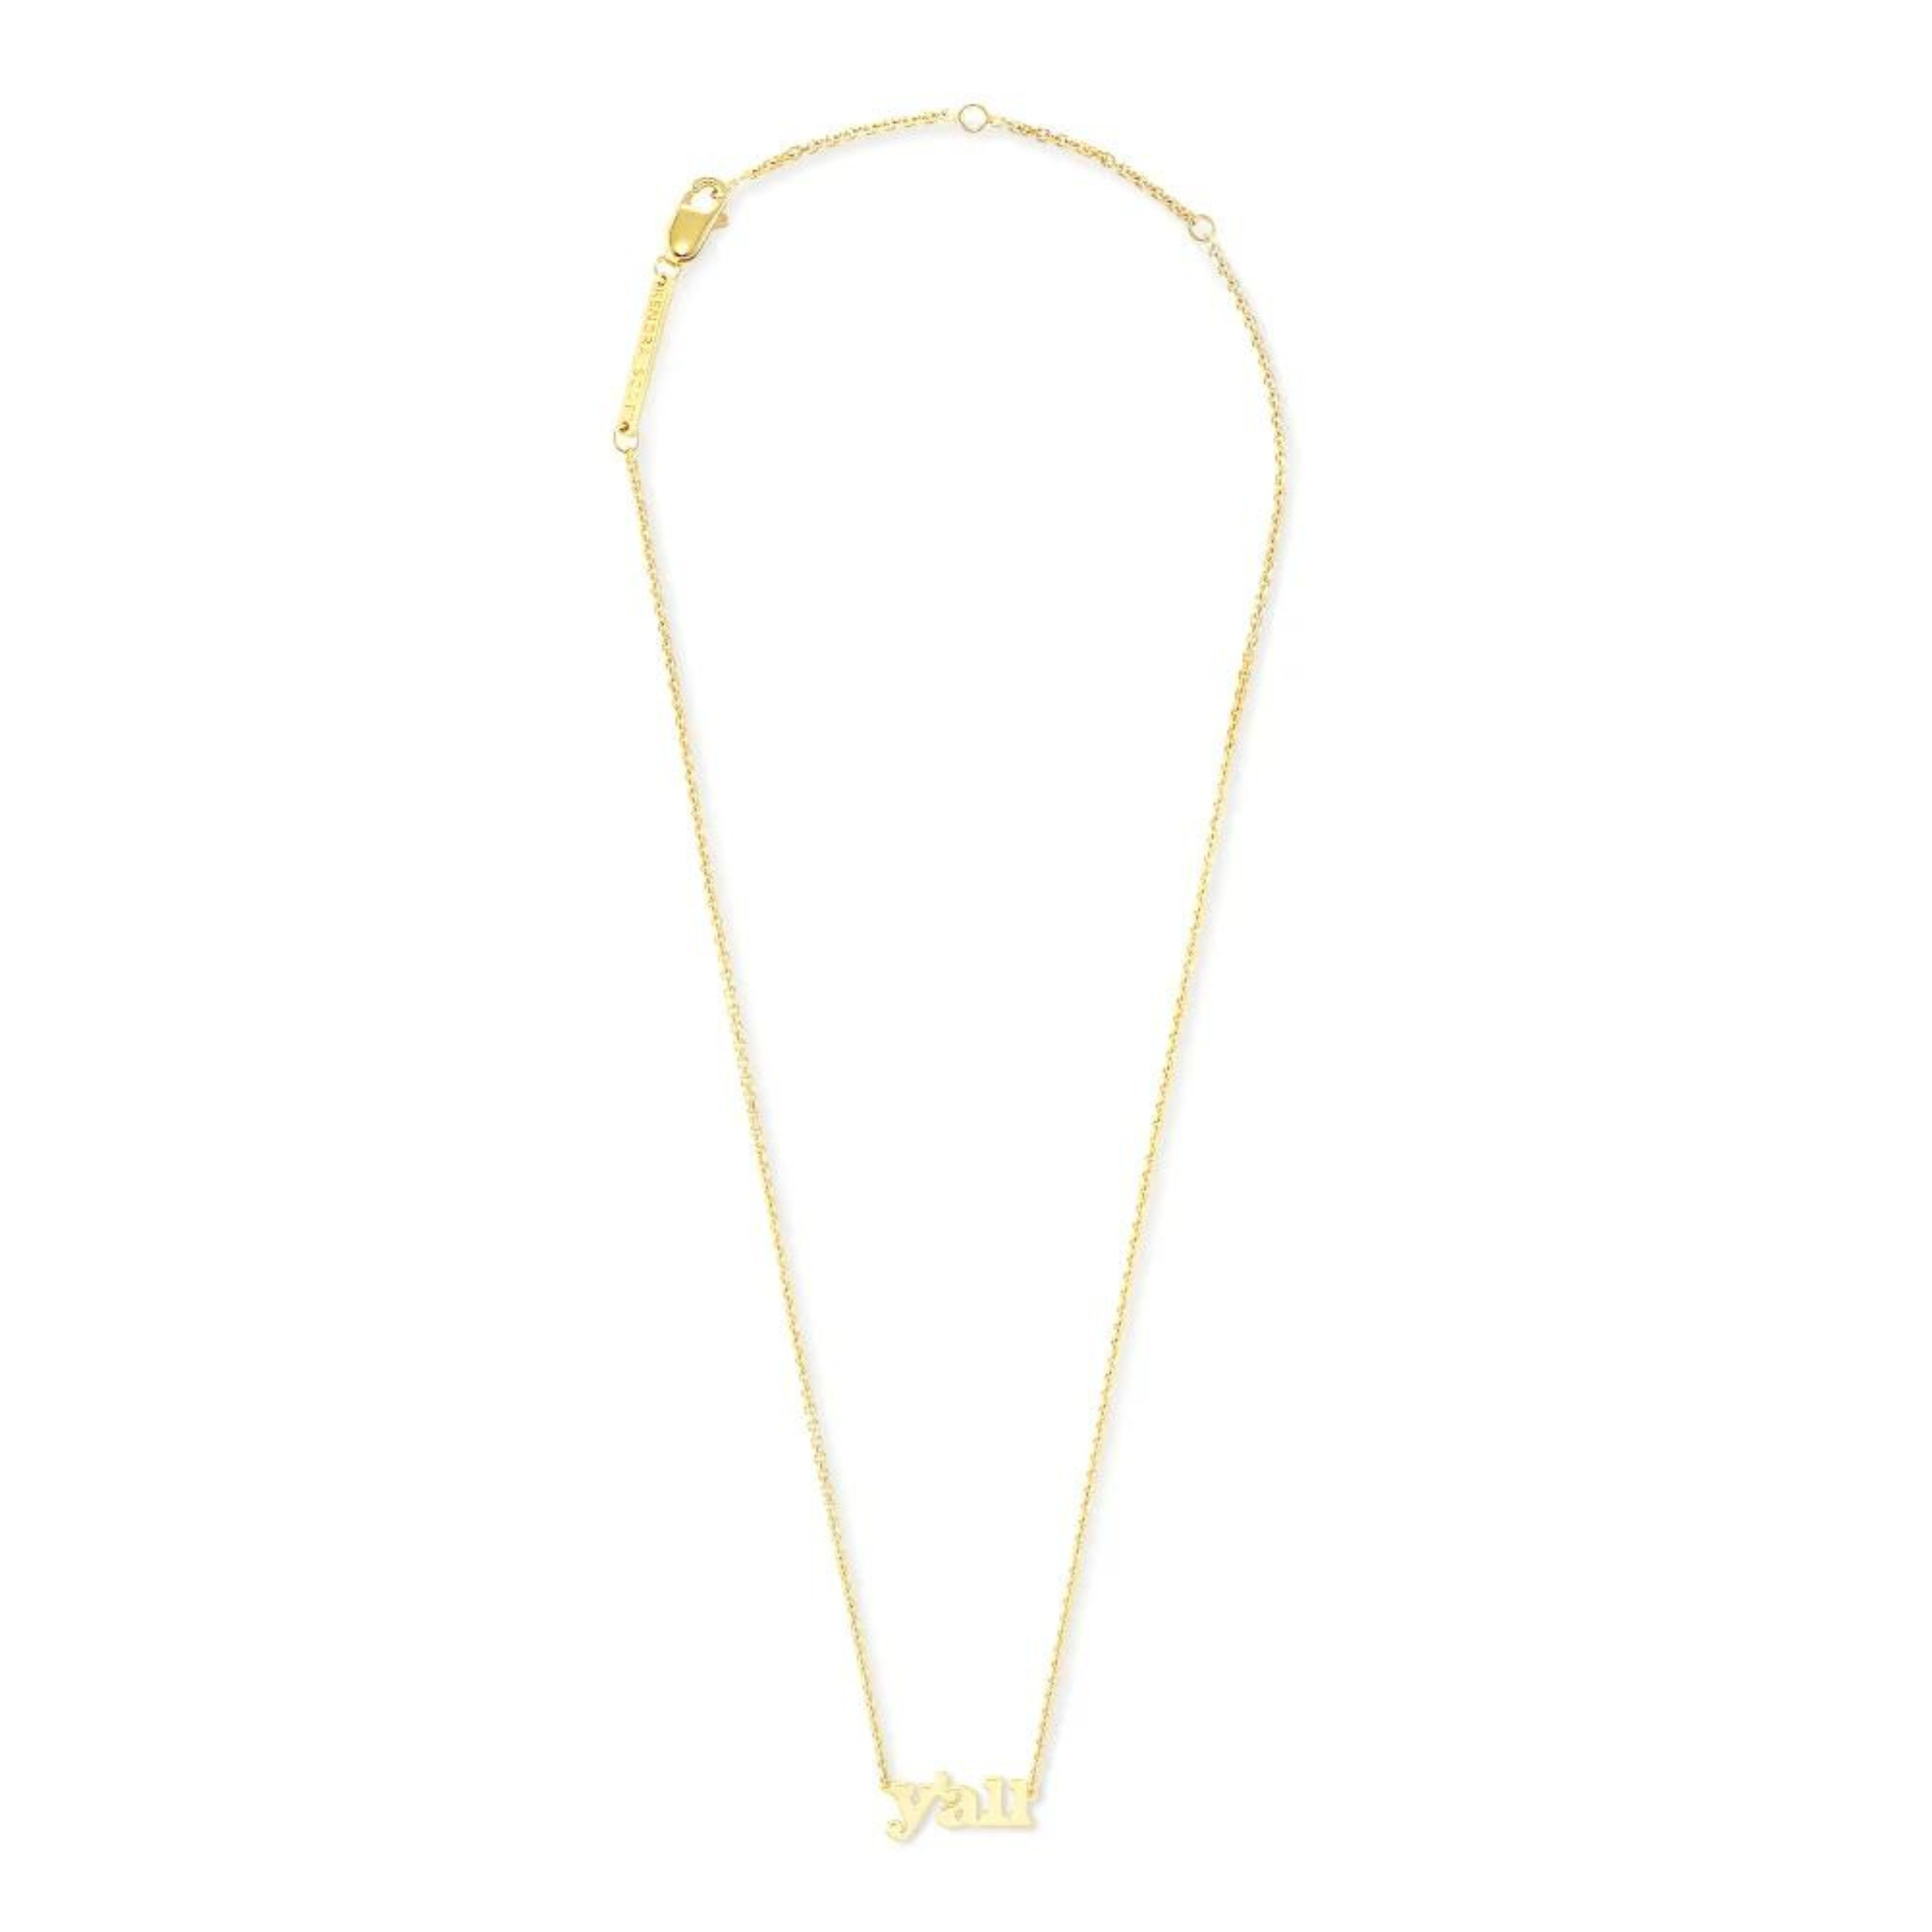 Kendra Scott | Y'all Pendant Necklace in Gold Vermeil - Giddy Up Glamour Boutique